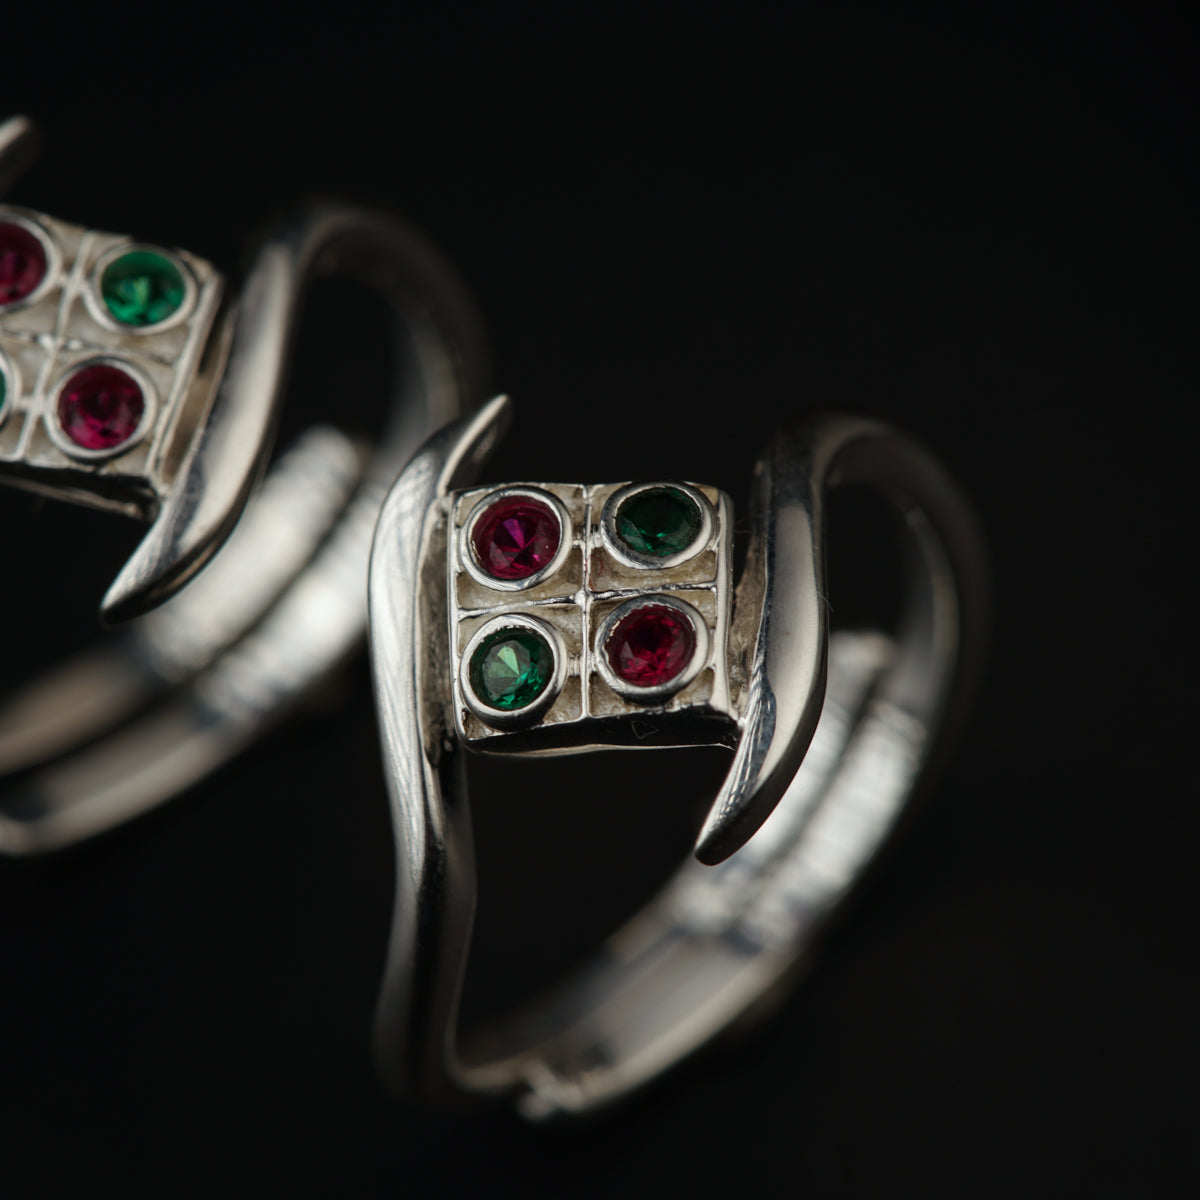 two silver rings with different colored stones on them